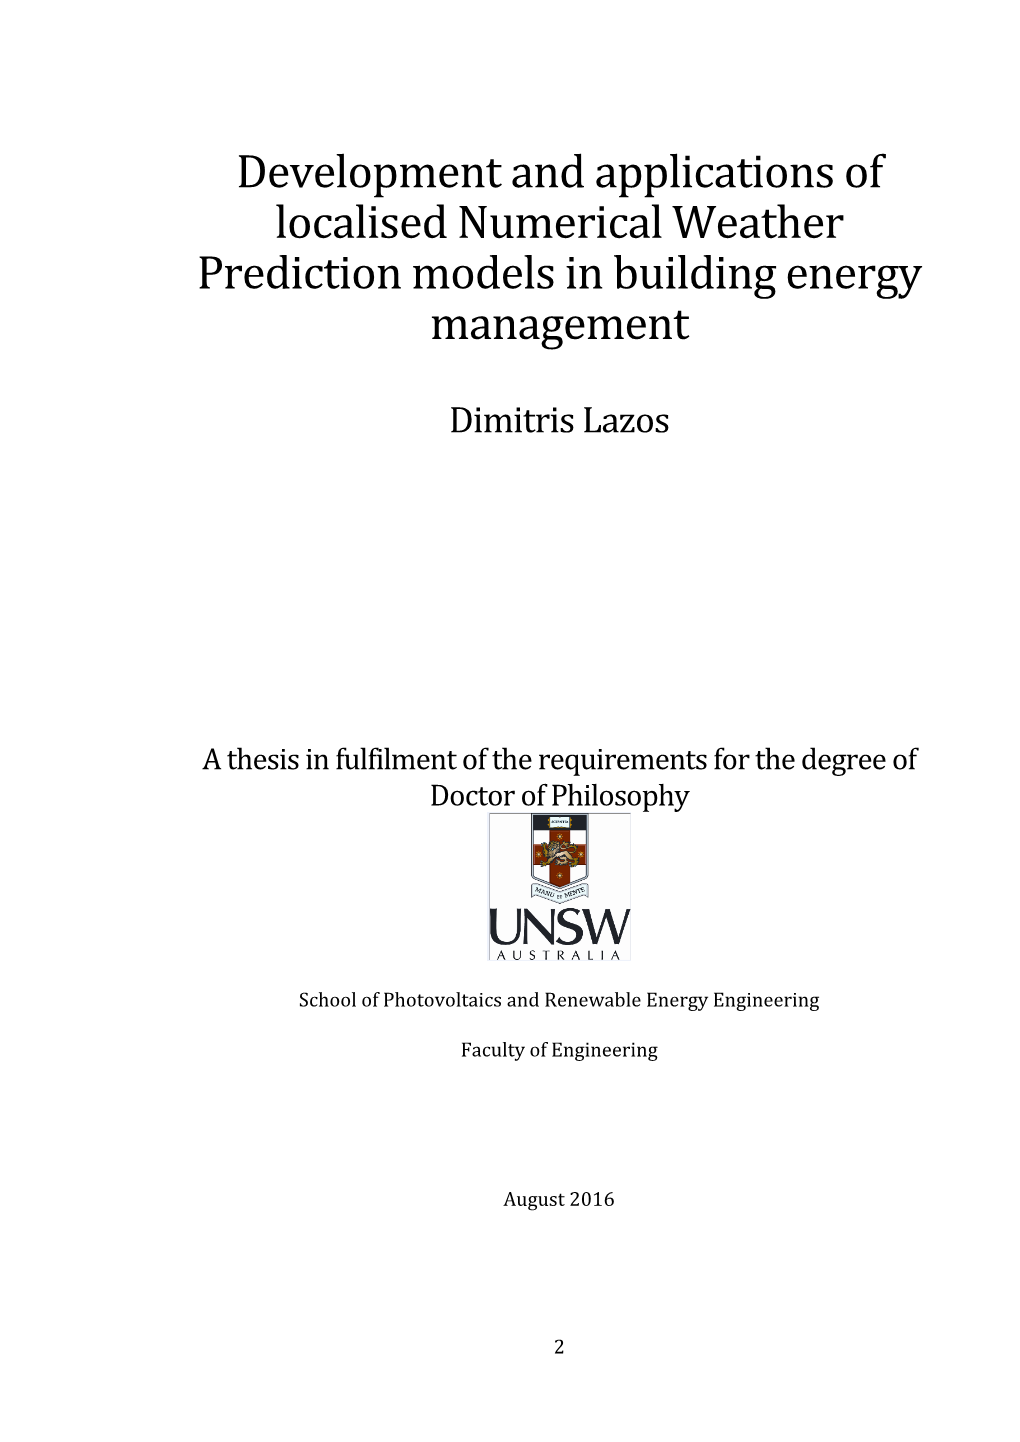 Development and Applications of Localised Numerical Weather Prediction Models in Building Energy Management